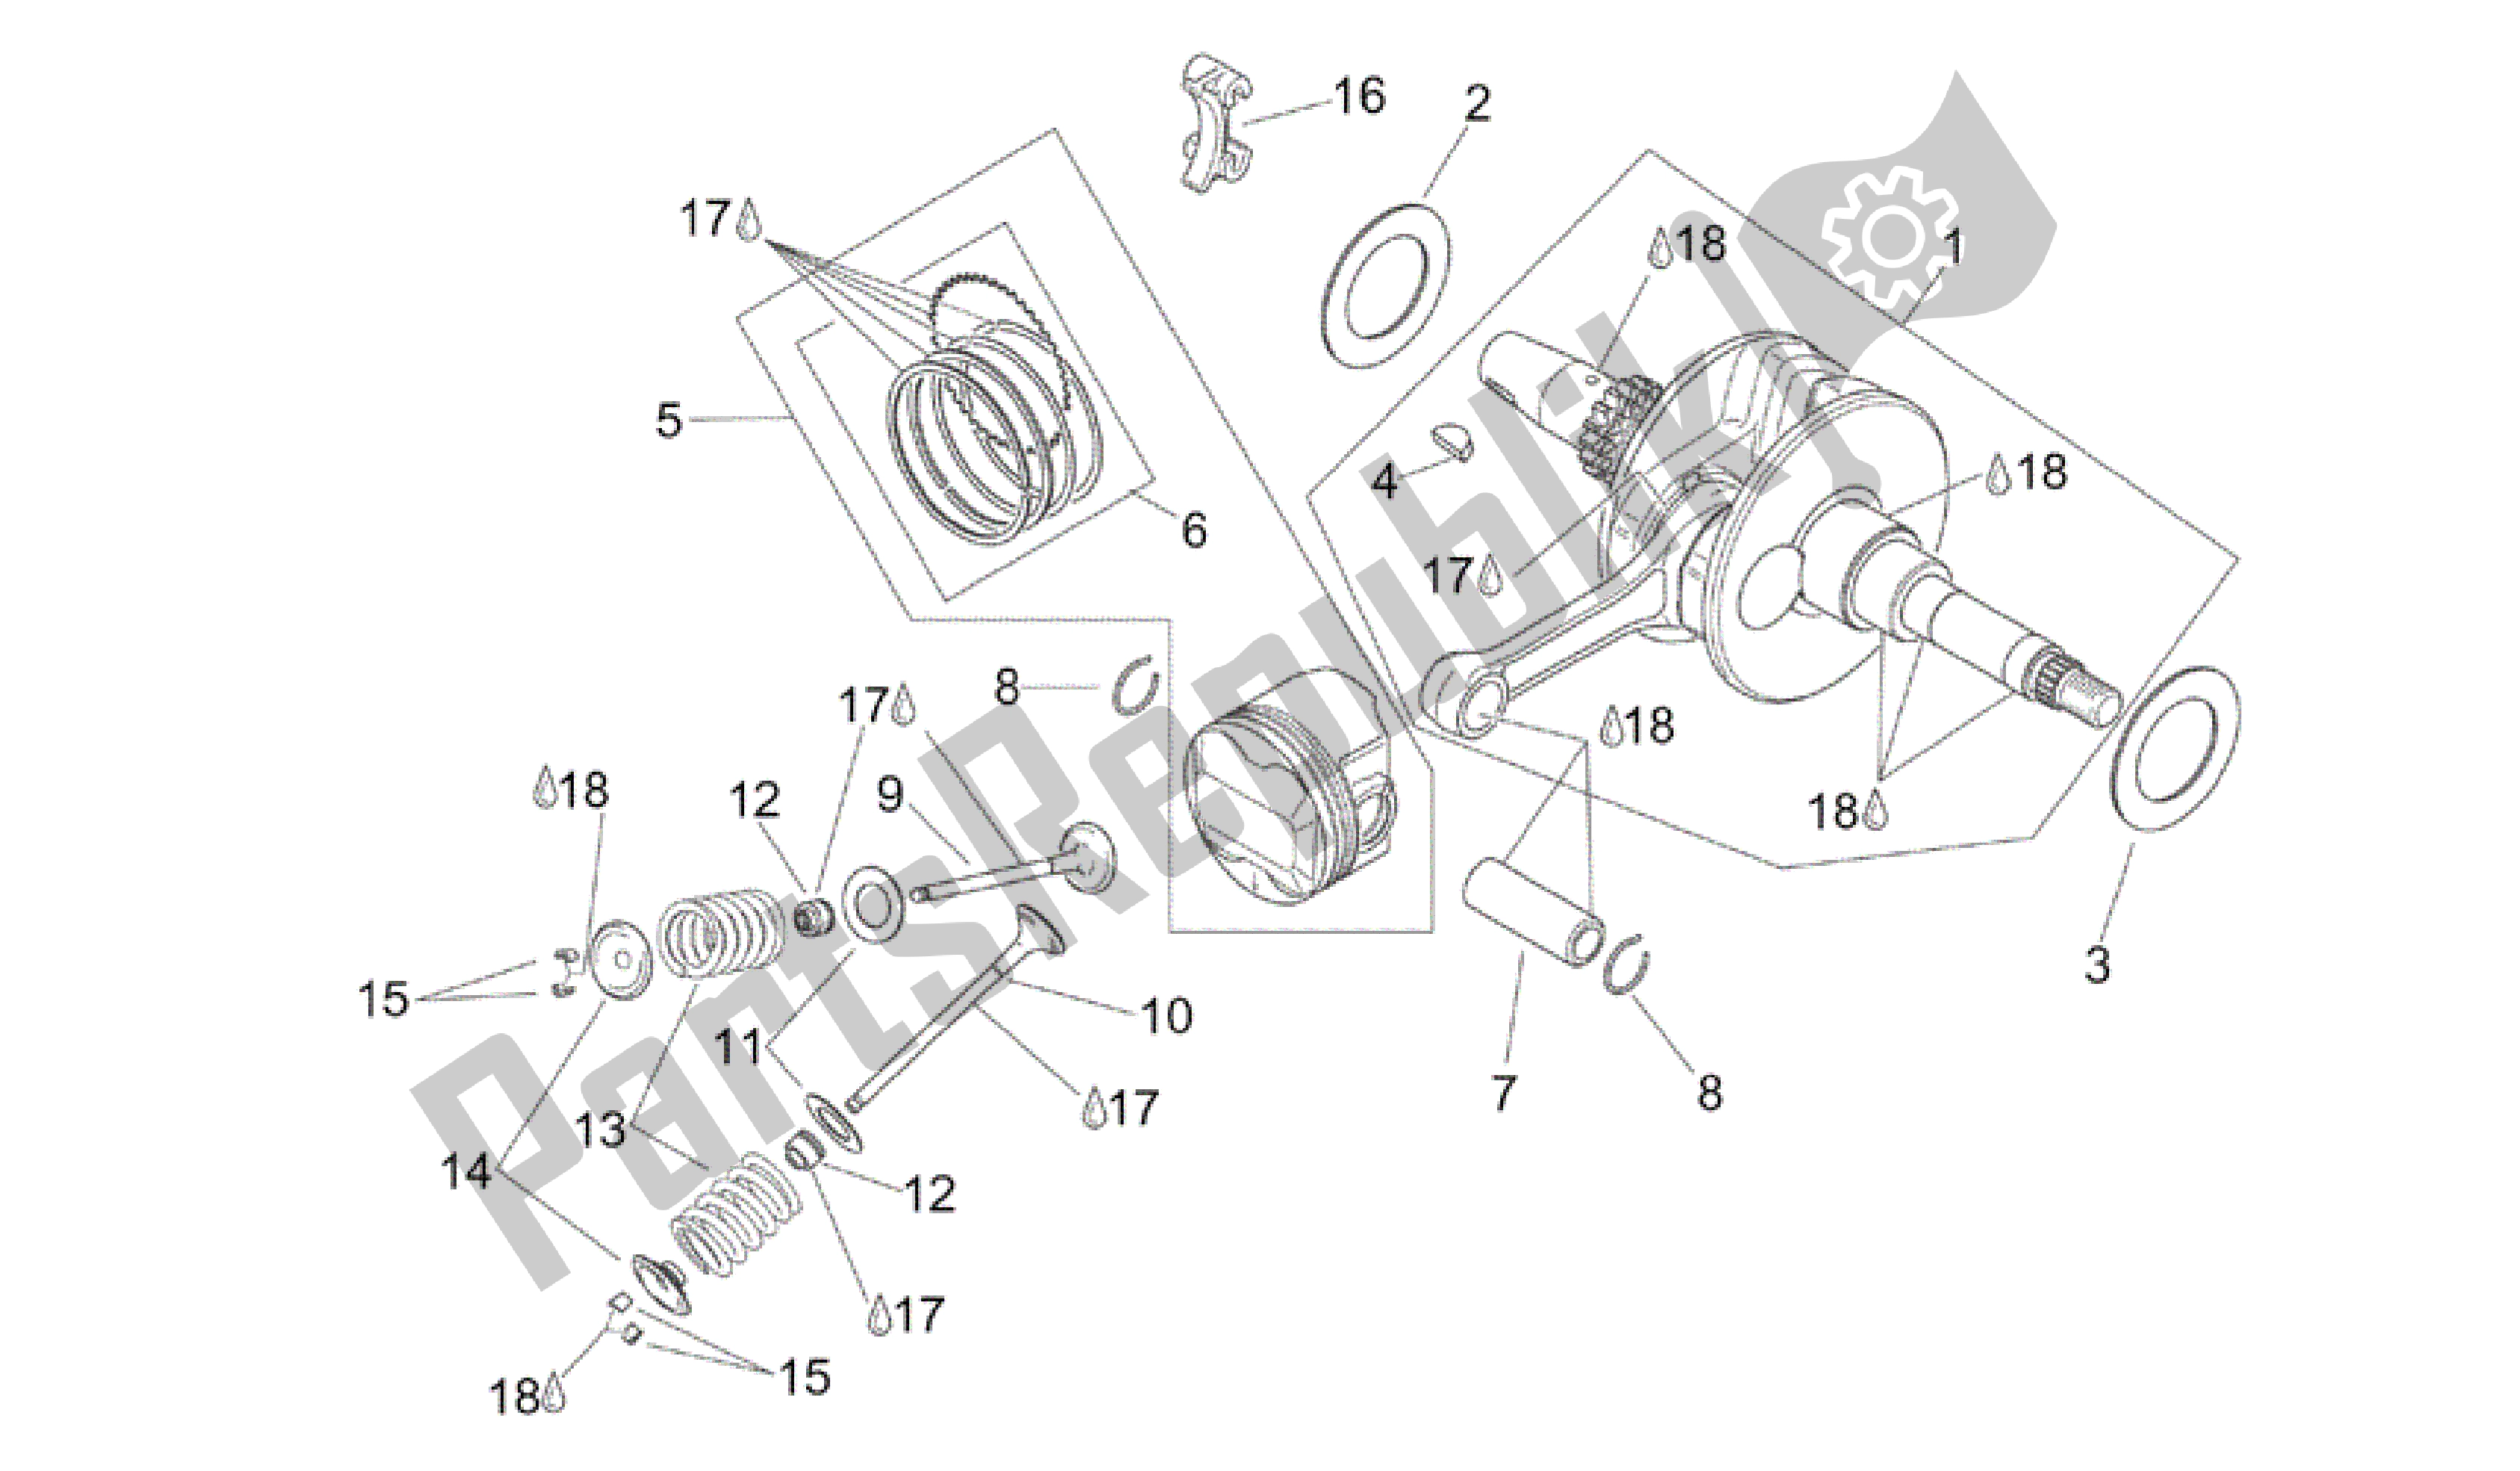 All parts for the Drive Shaft of the Aprilia Scarabeo 125 1999 - 2004